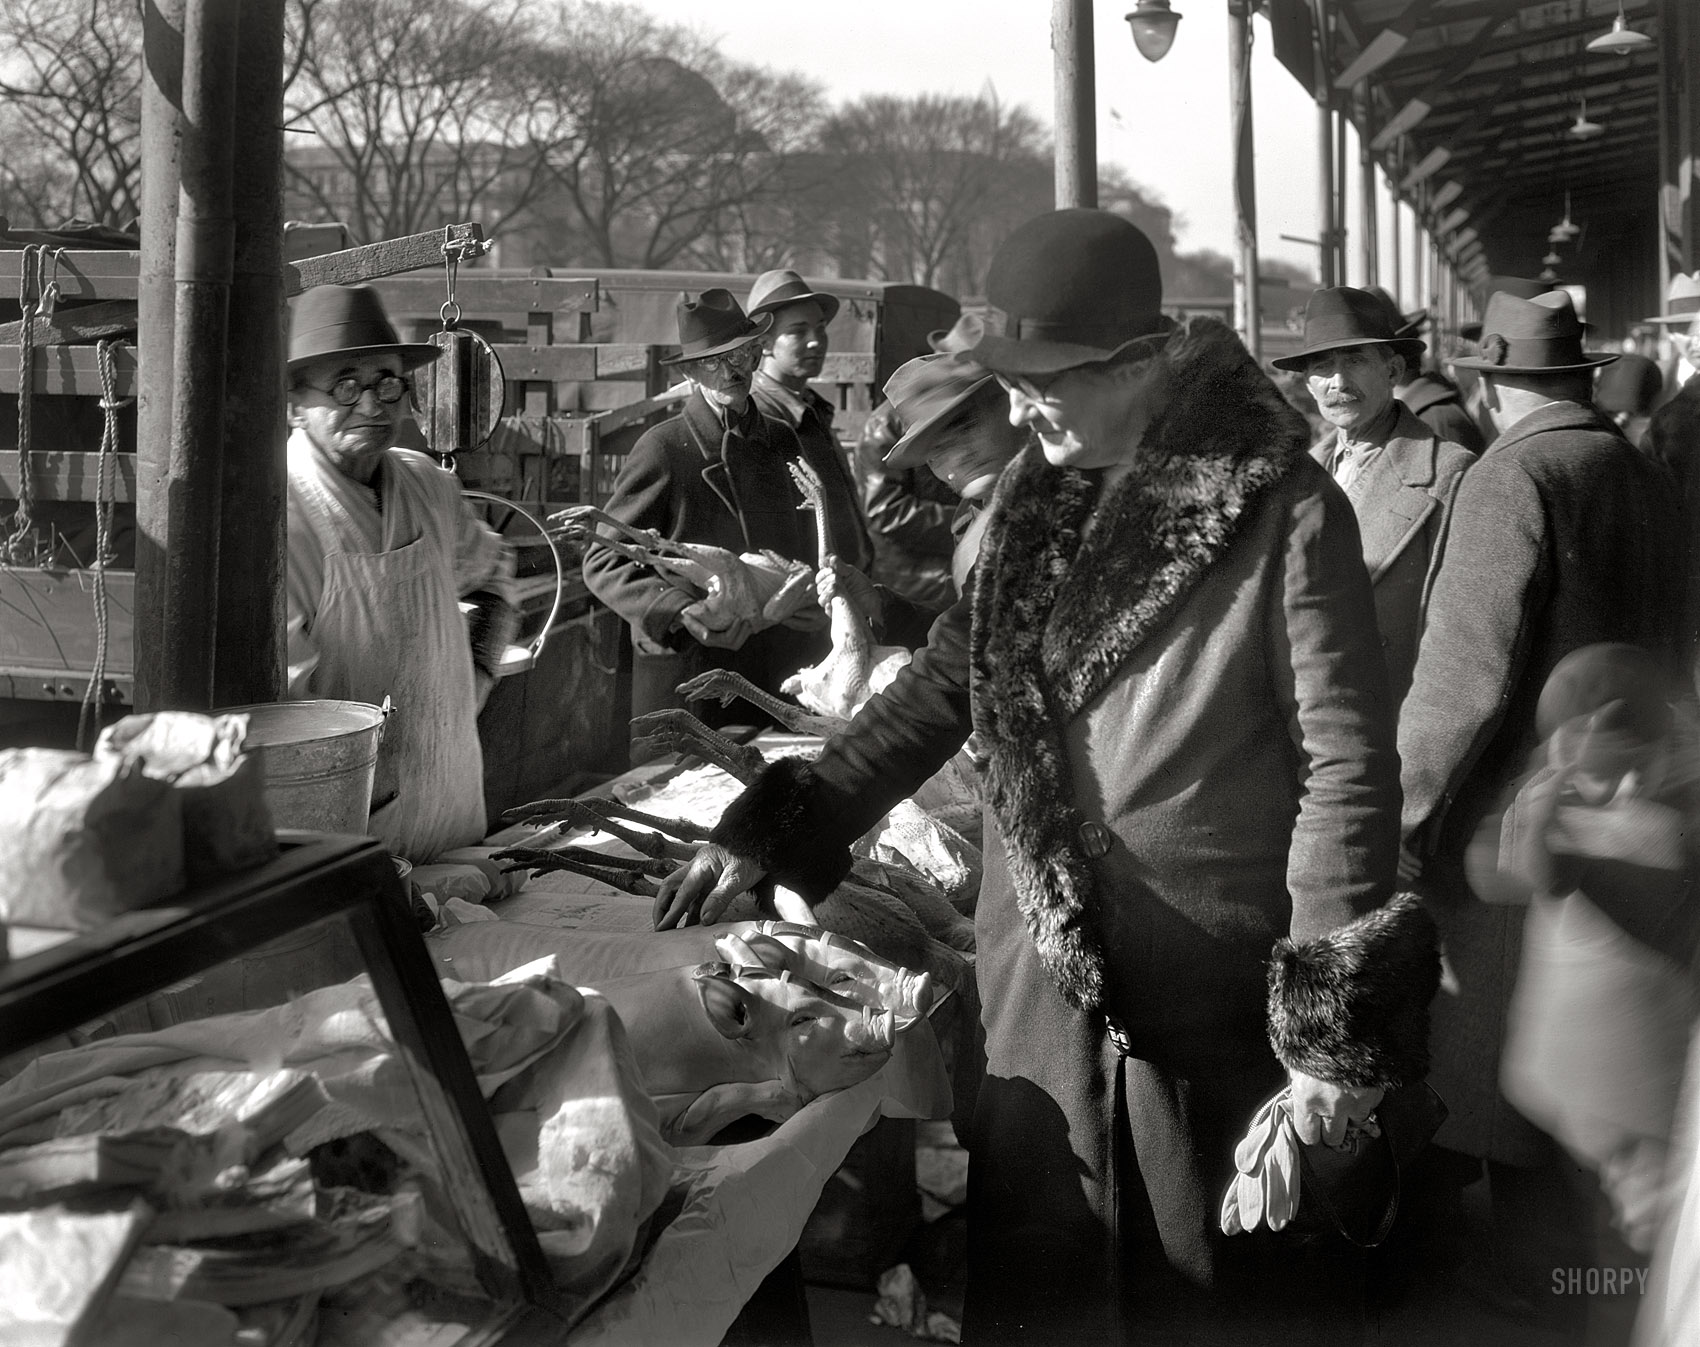 Washington, D.C., circa 1935. "Shopping at Center Market." Perusing the original whole foods. Acetate negative by Theodor Horydczak. View full size.